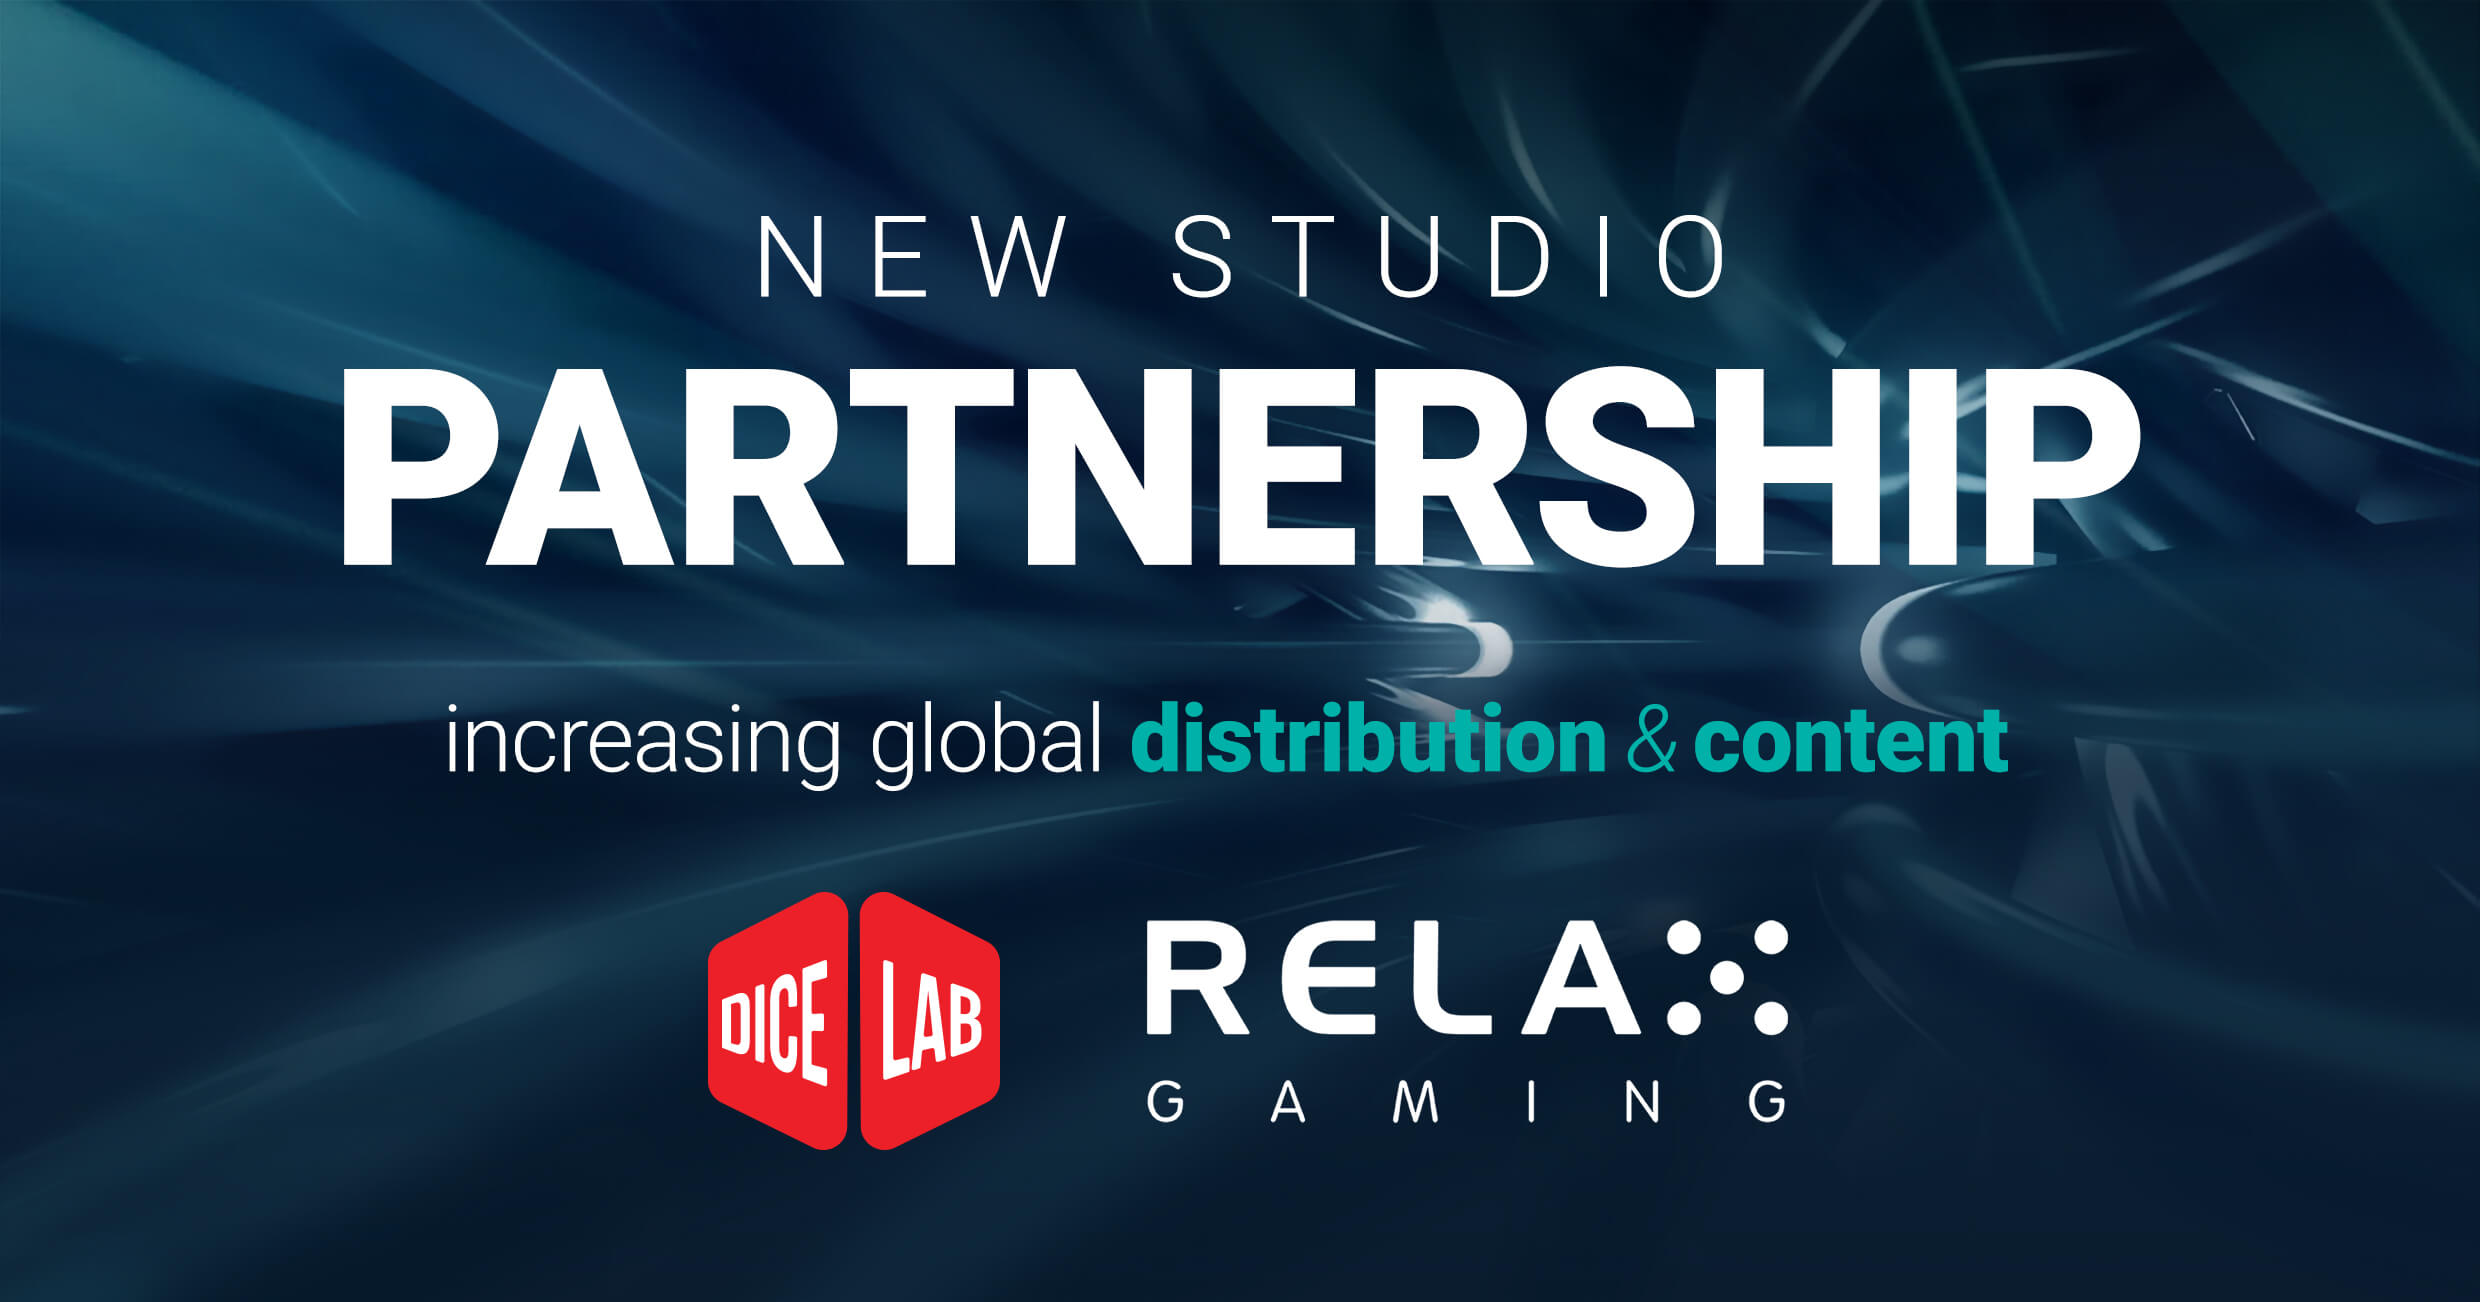 Relax Gaming partners with Dice Lab